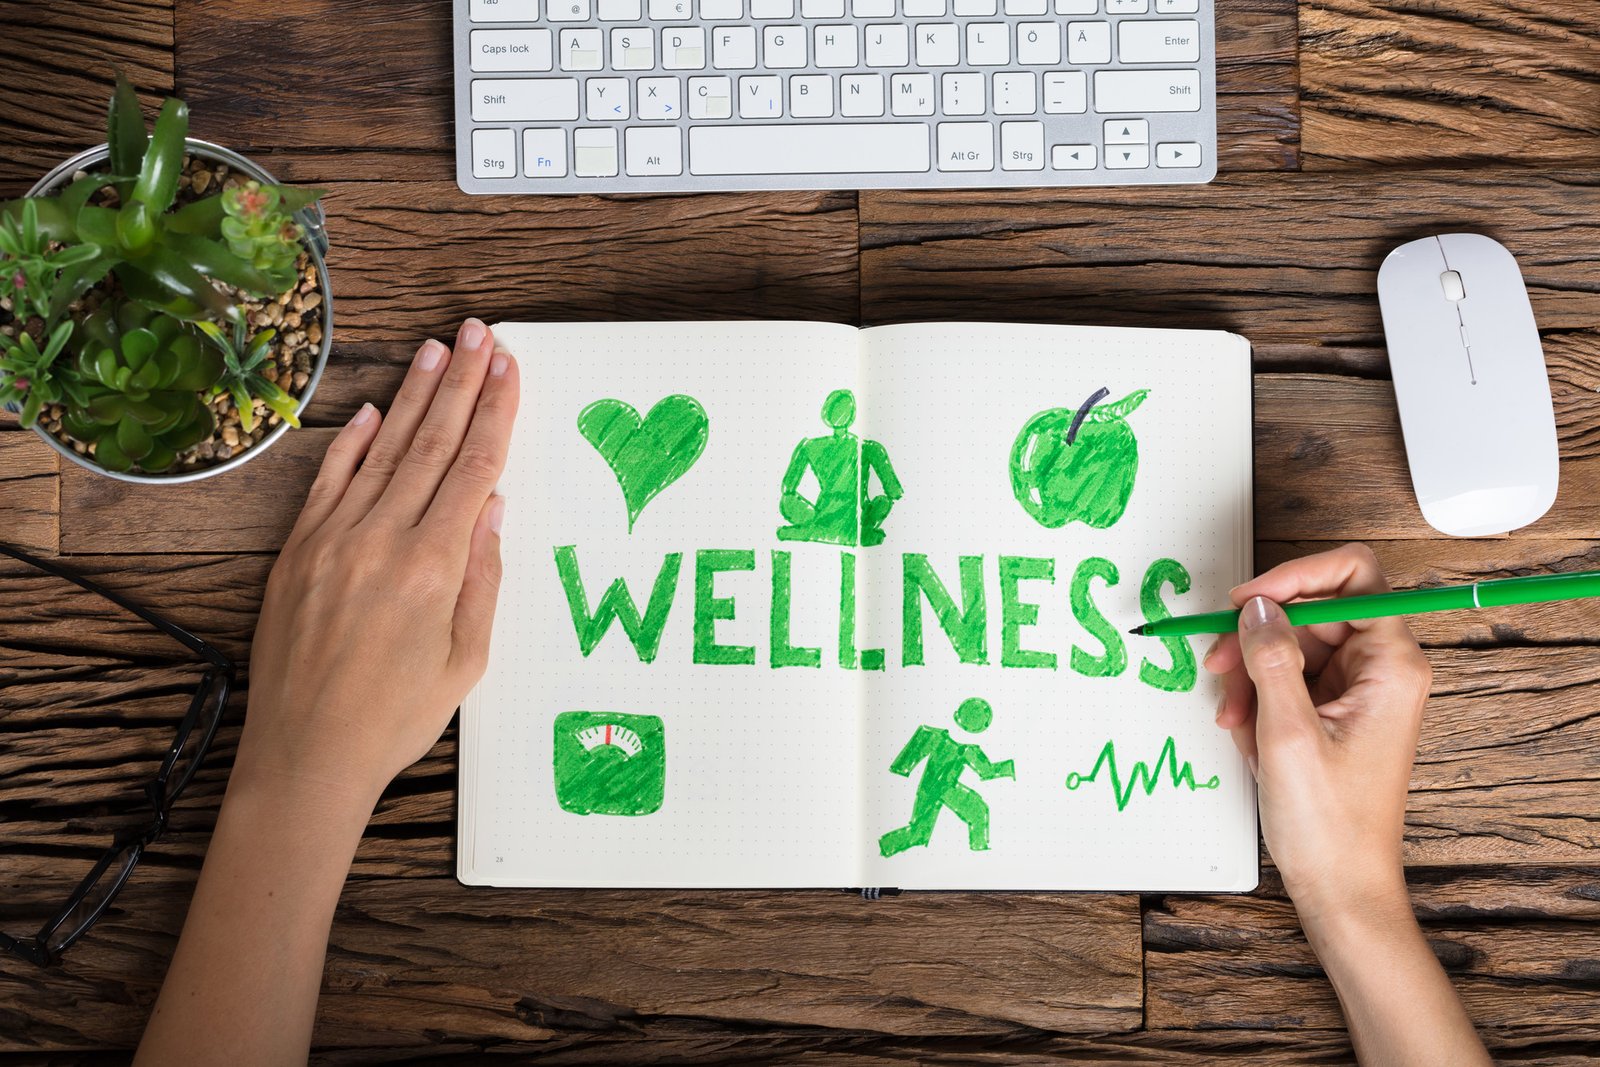 Employee Health Benefits: What Is The Best Way To Implement Them Into Your Workplace?